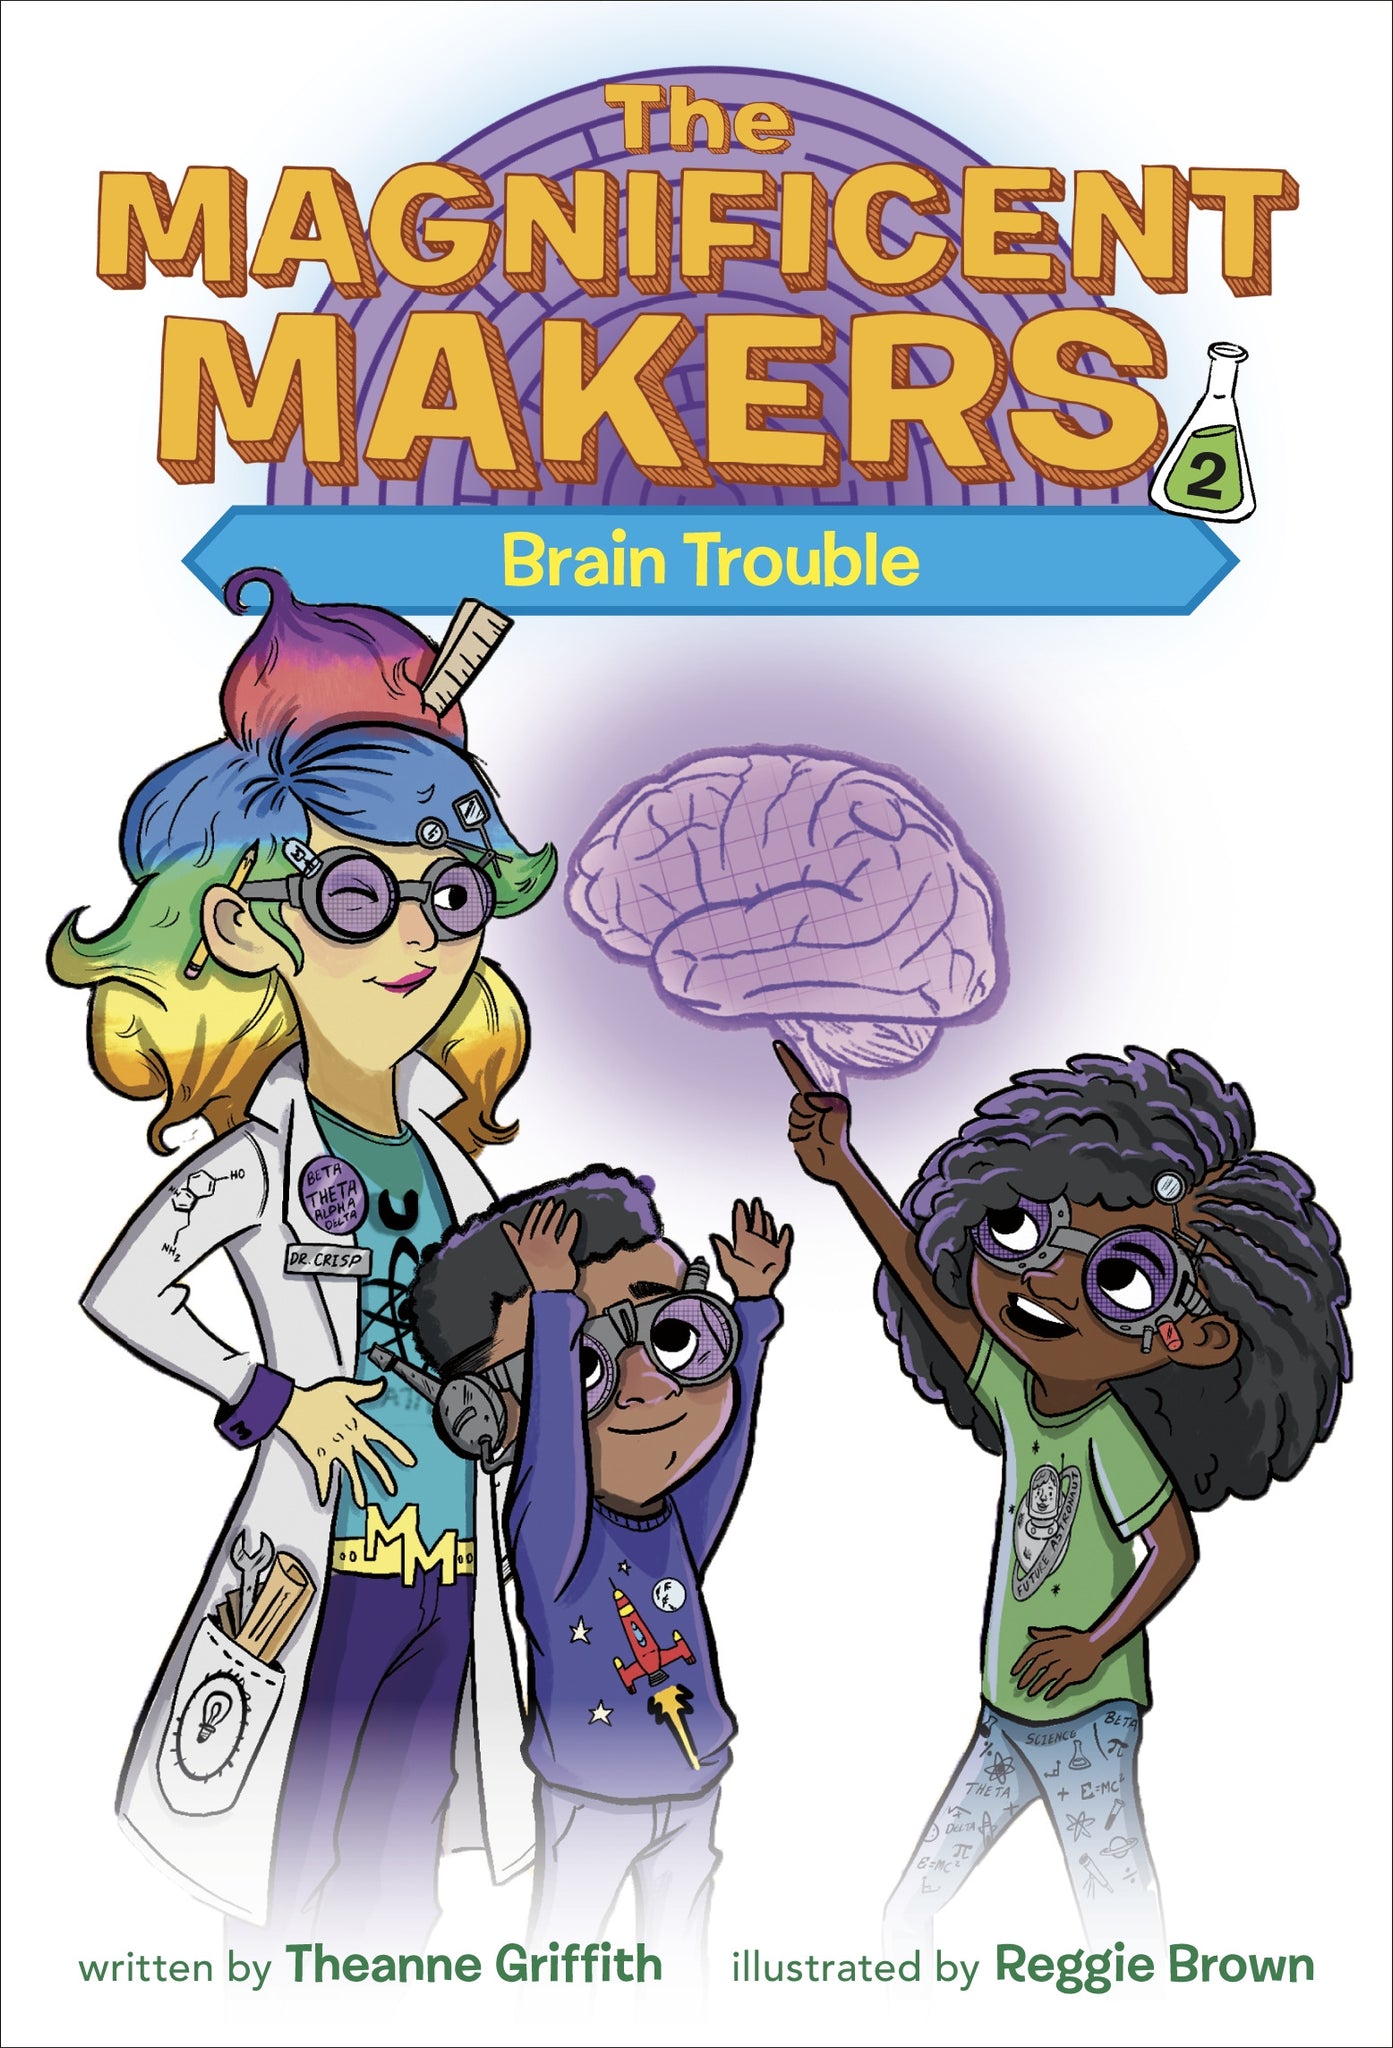 The Magnificent Makers #2: Brain Trouble - Paperback